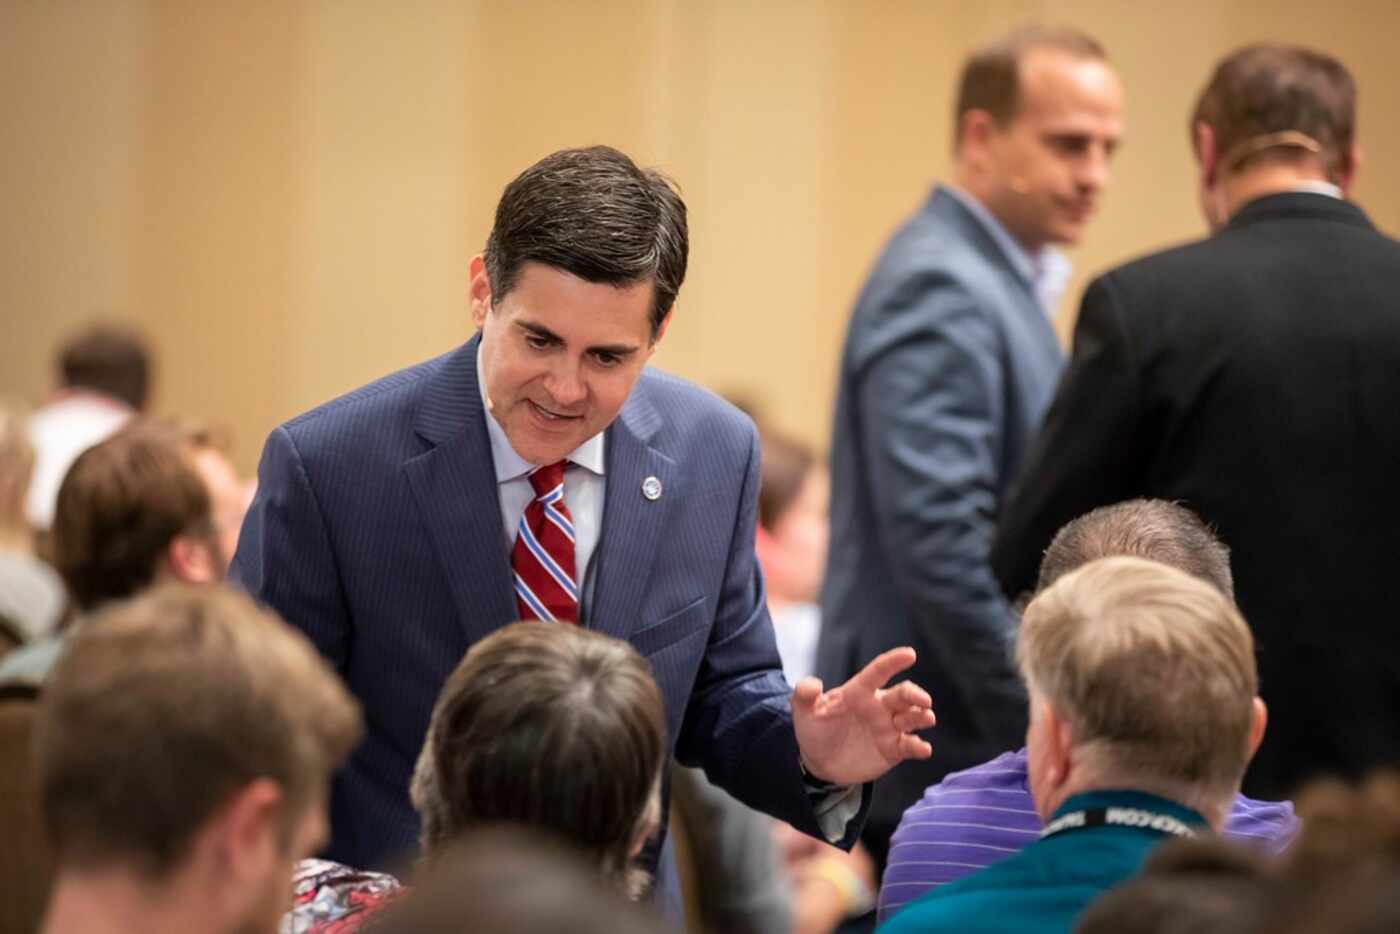 Russell Moore talks with people in the audience before a conversation on "Gospel Sexuality...